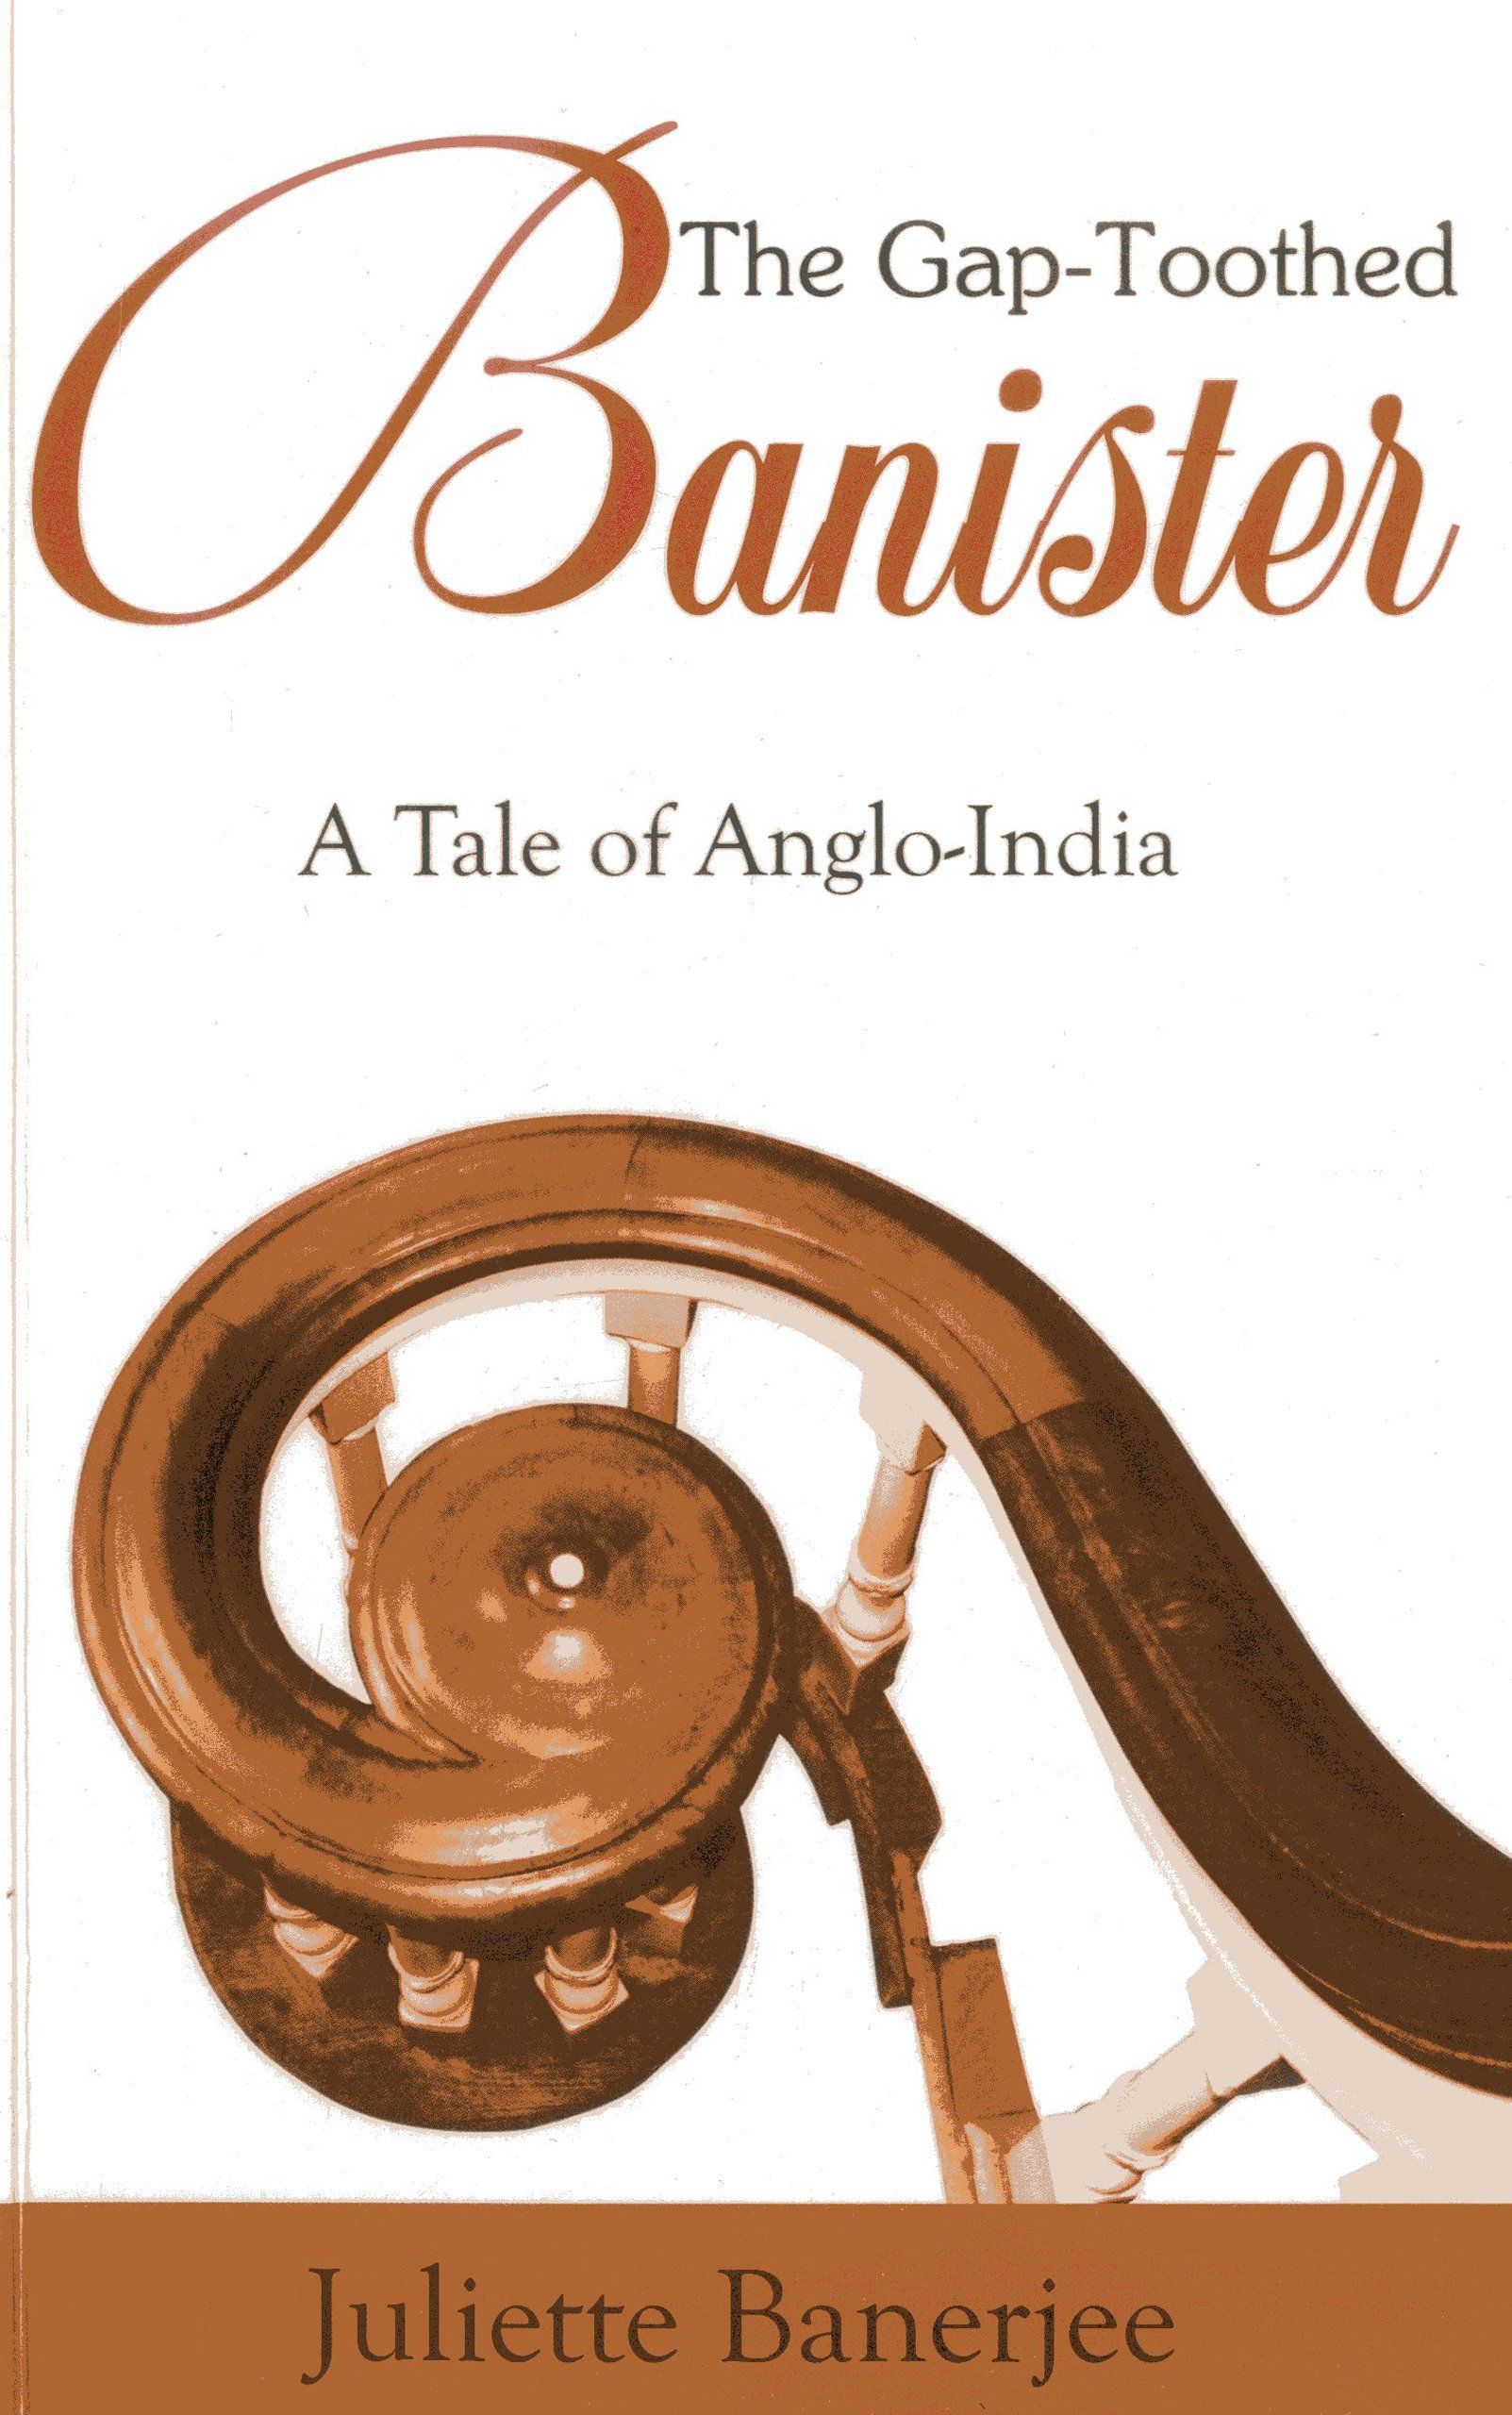 Another Look at India’s Books: Juliette Banerjee’s “The Gap-Toothed Banister: A Tale of Anglo-India”